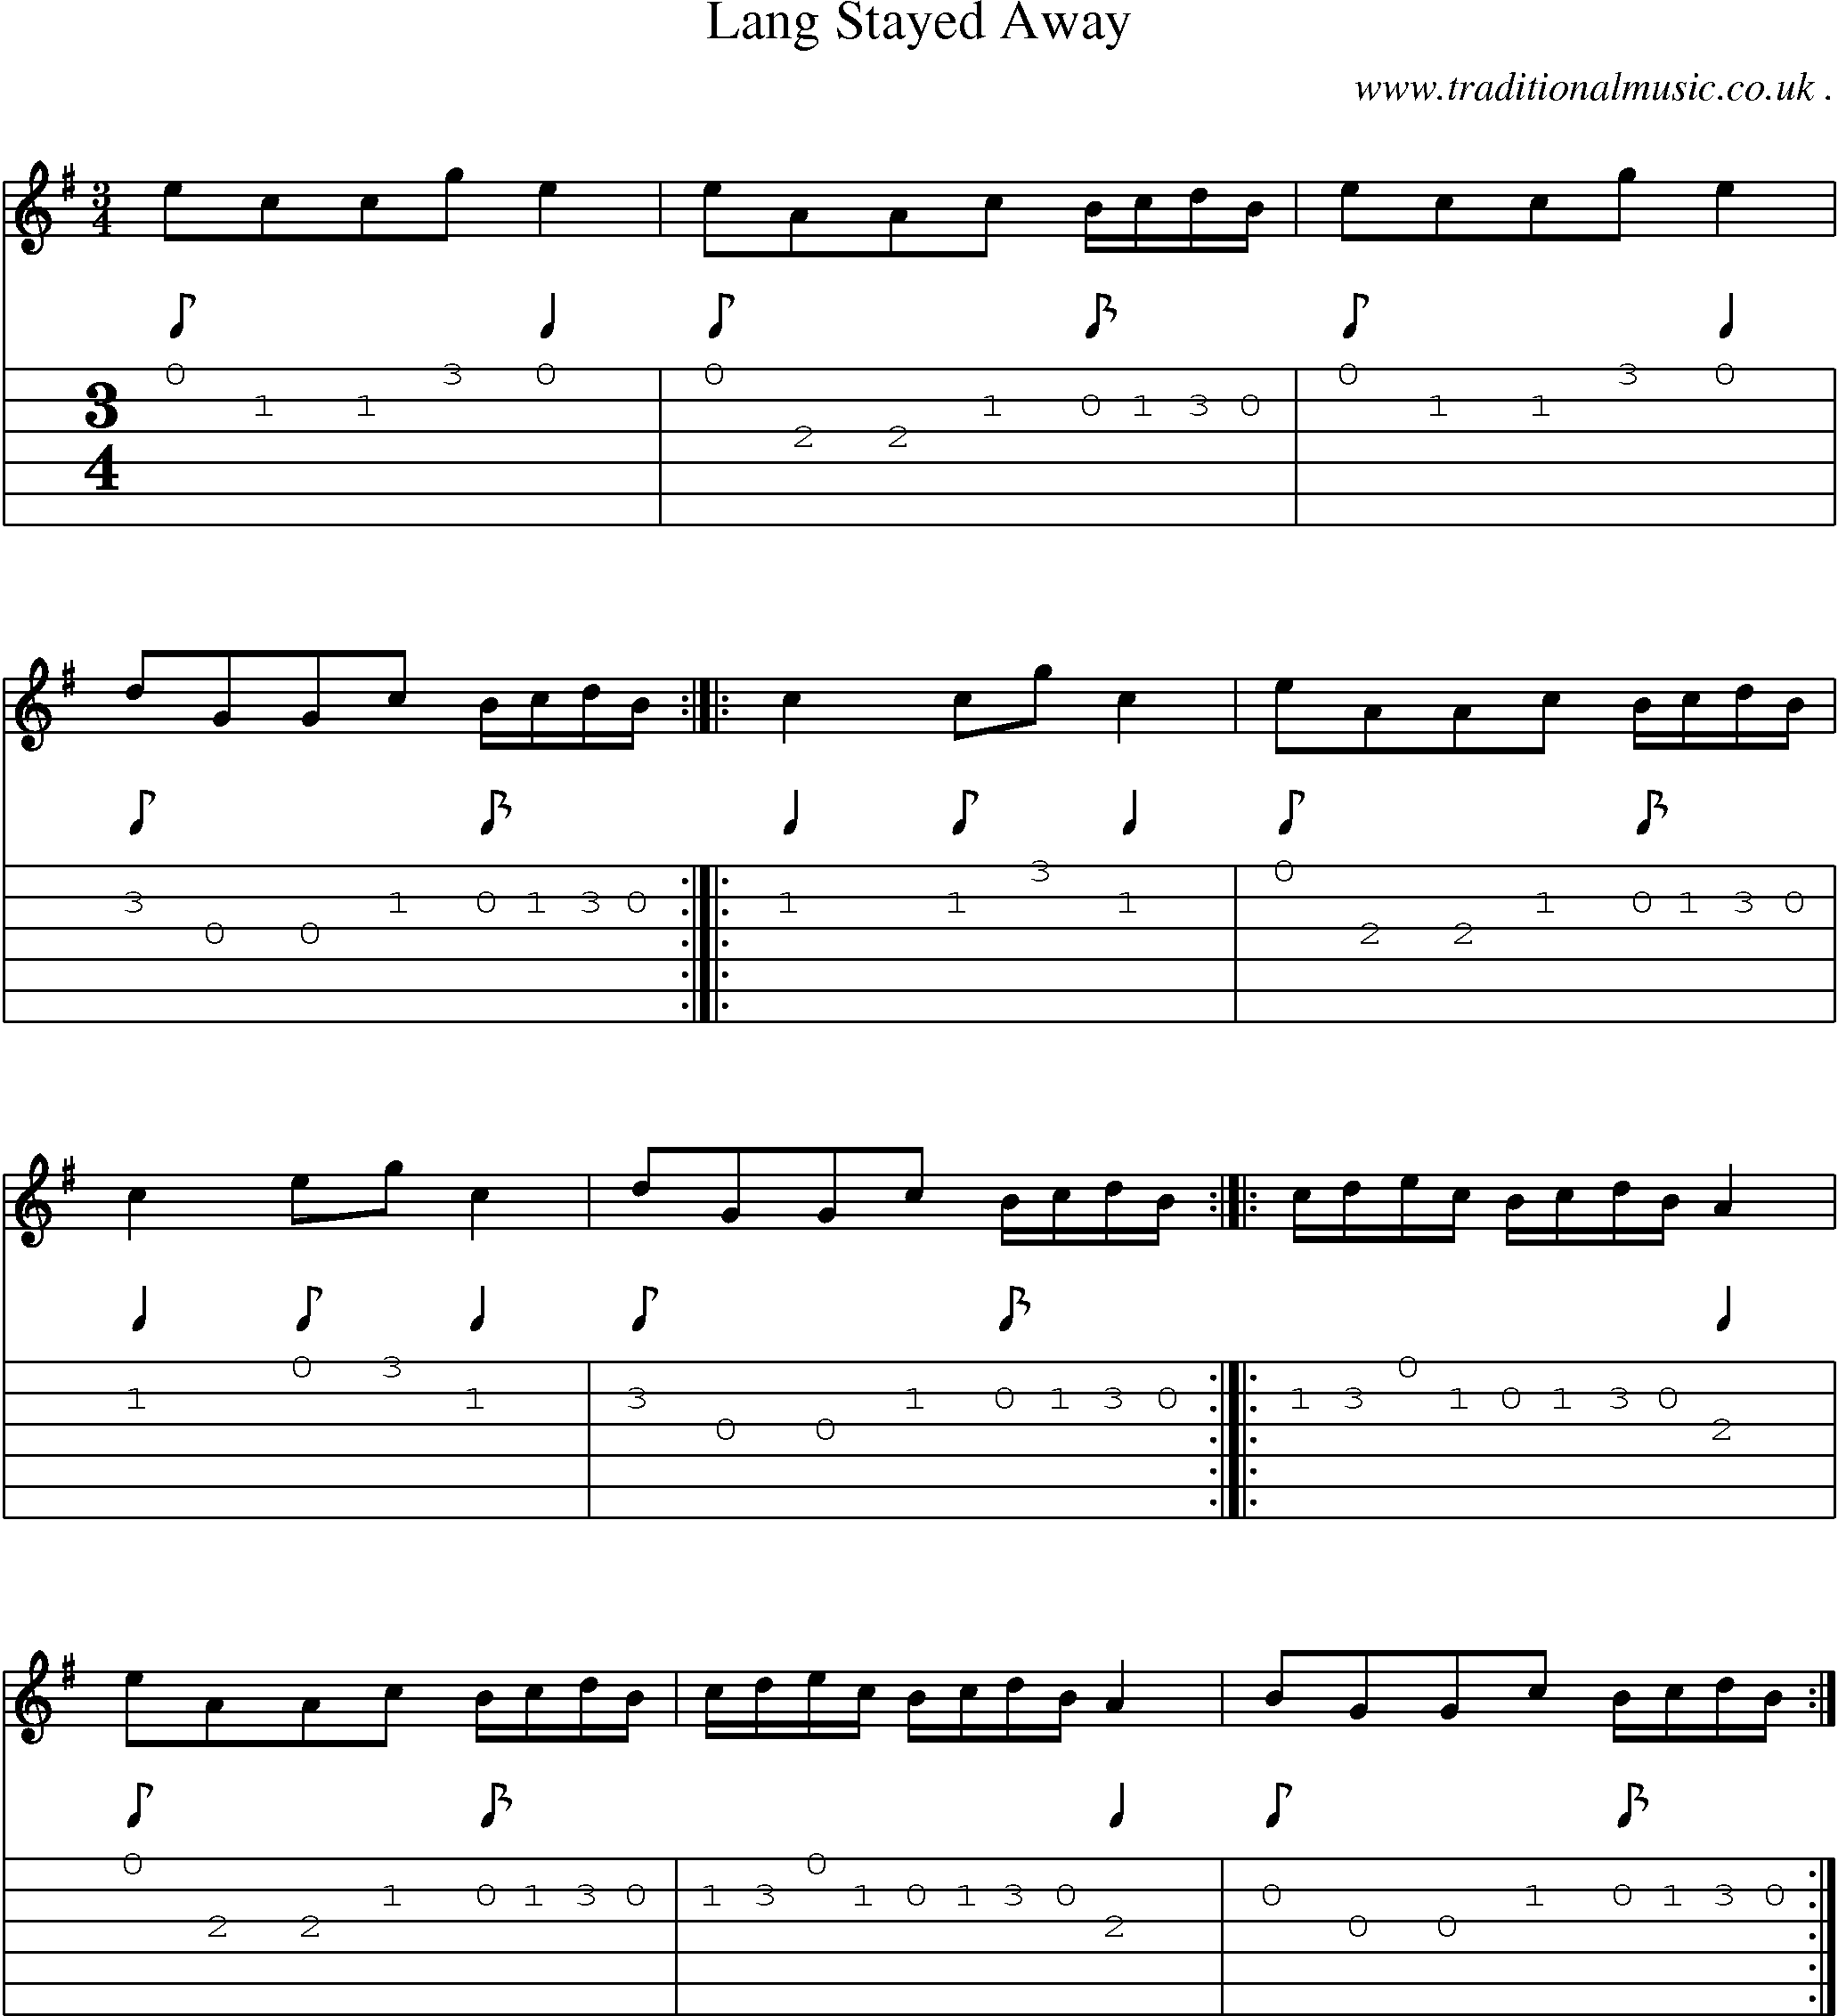 Sheet-Music and Guitar Tabs for Lang Stayed Away